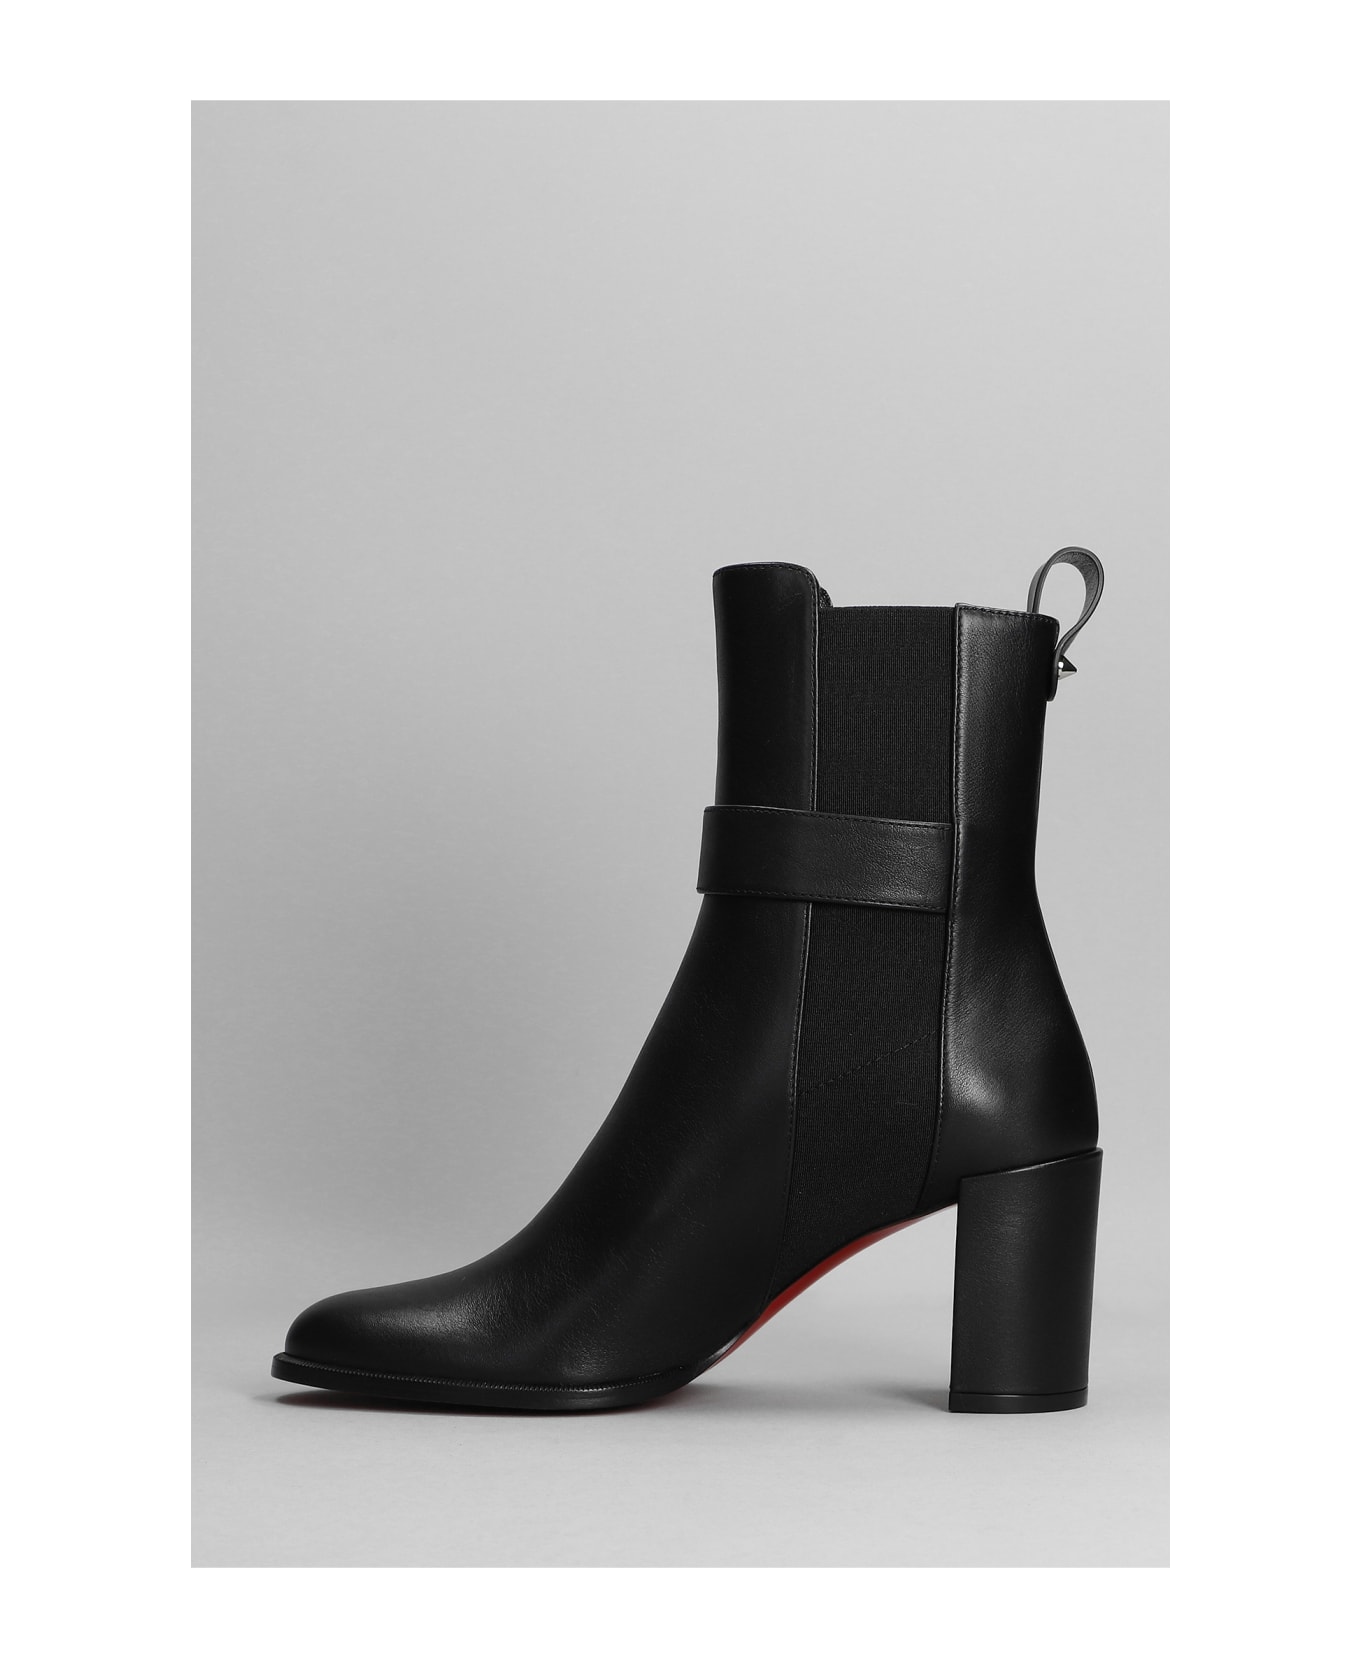 Christian Louboutin Karistrap Leather 70mm Red Sole Ankle Boot